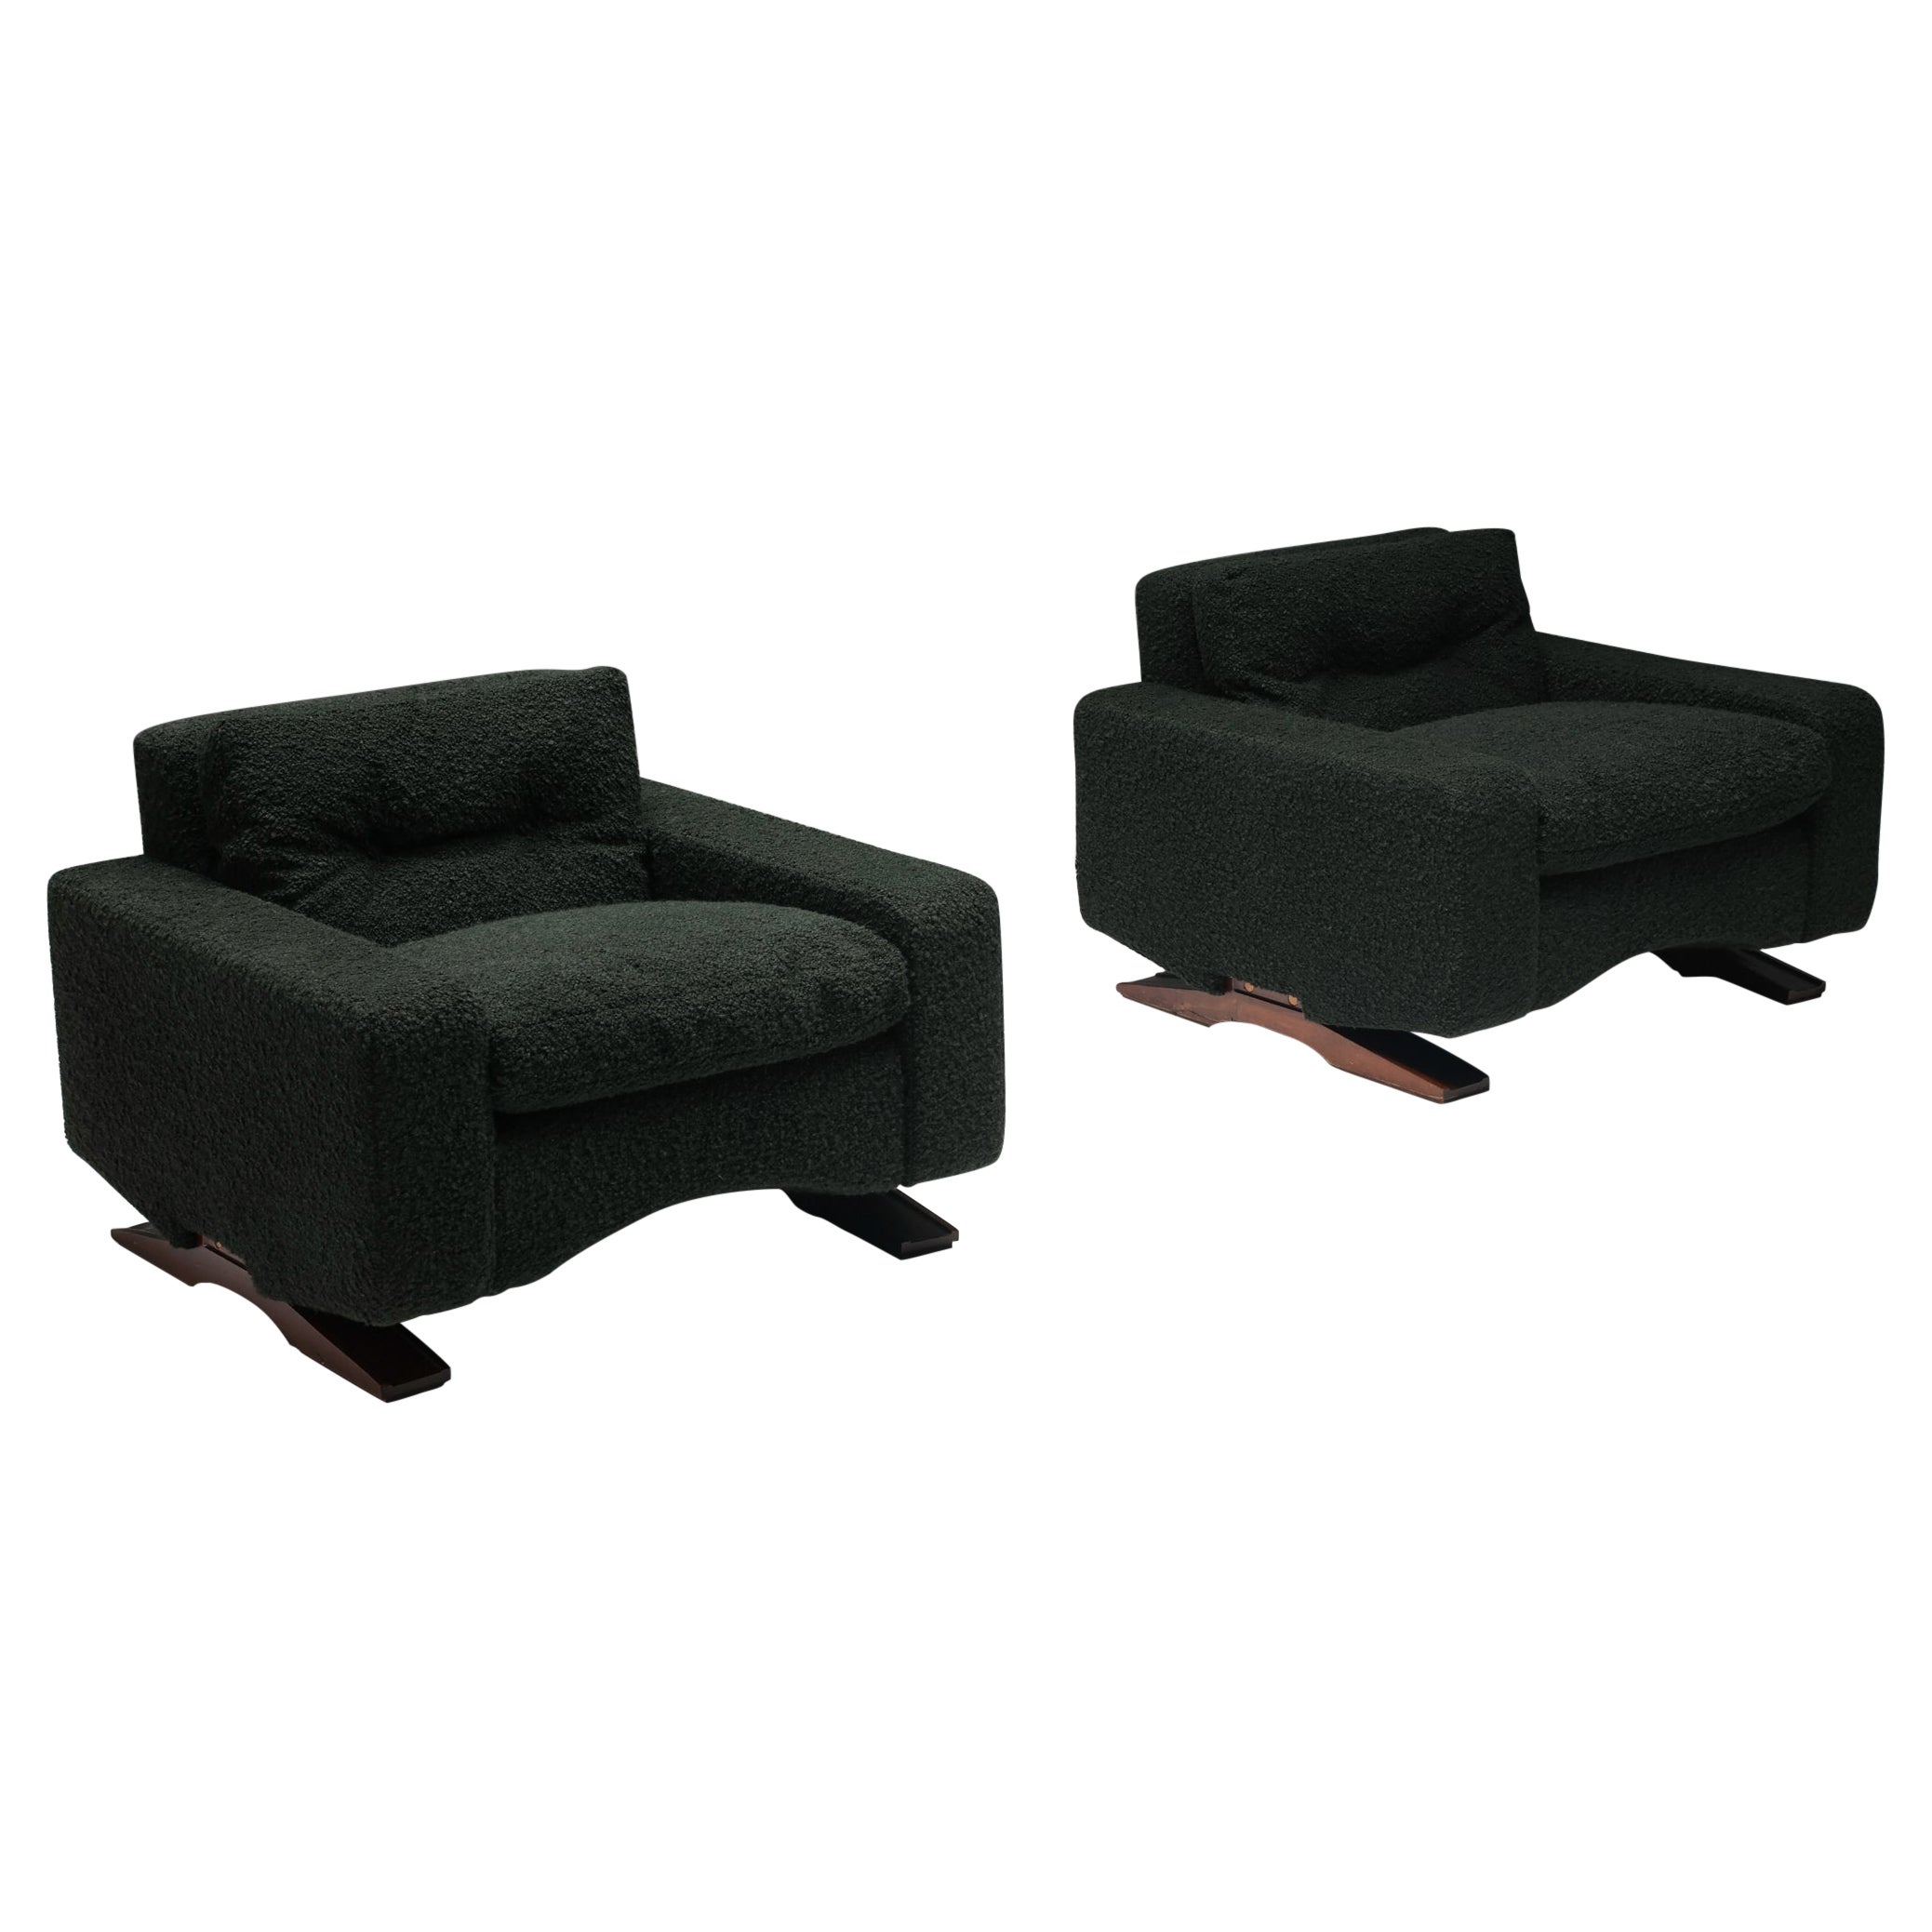 Franz Sartori for Flexform, Pair of Lounge Chairs in Dark Green Boucle, Italy